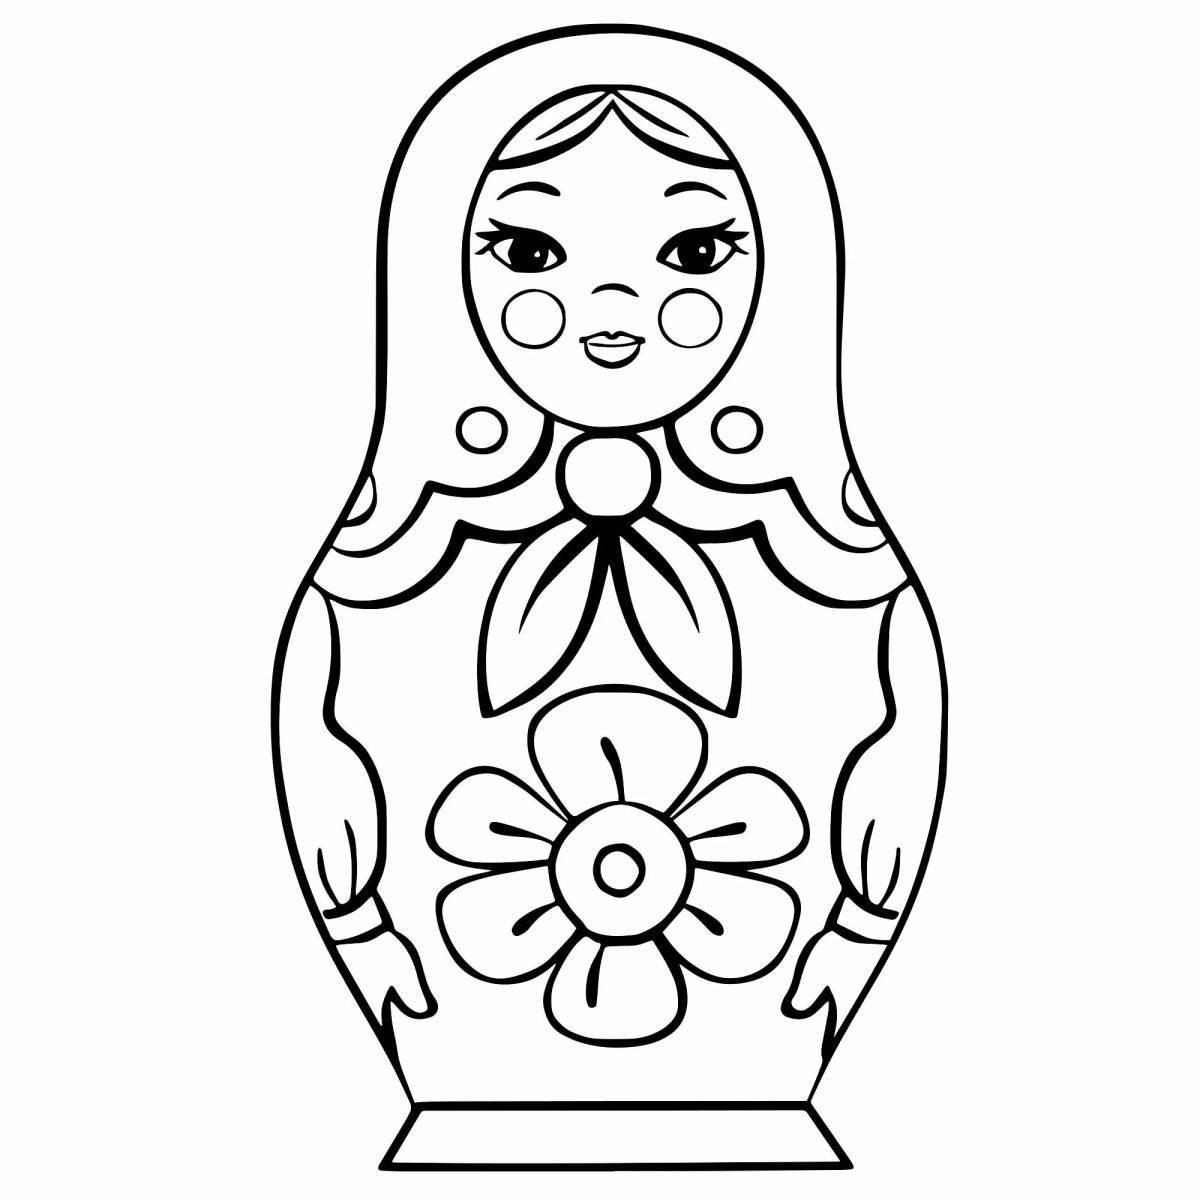 Happy Russian matryoshka coloring book for 6-7 year olds